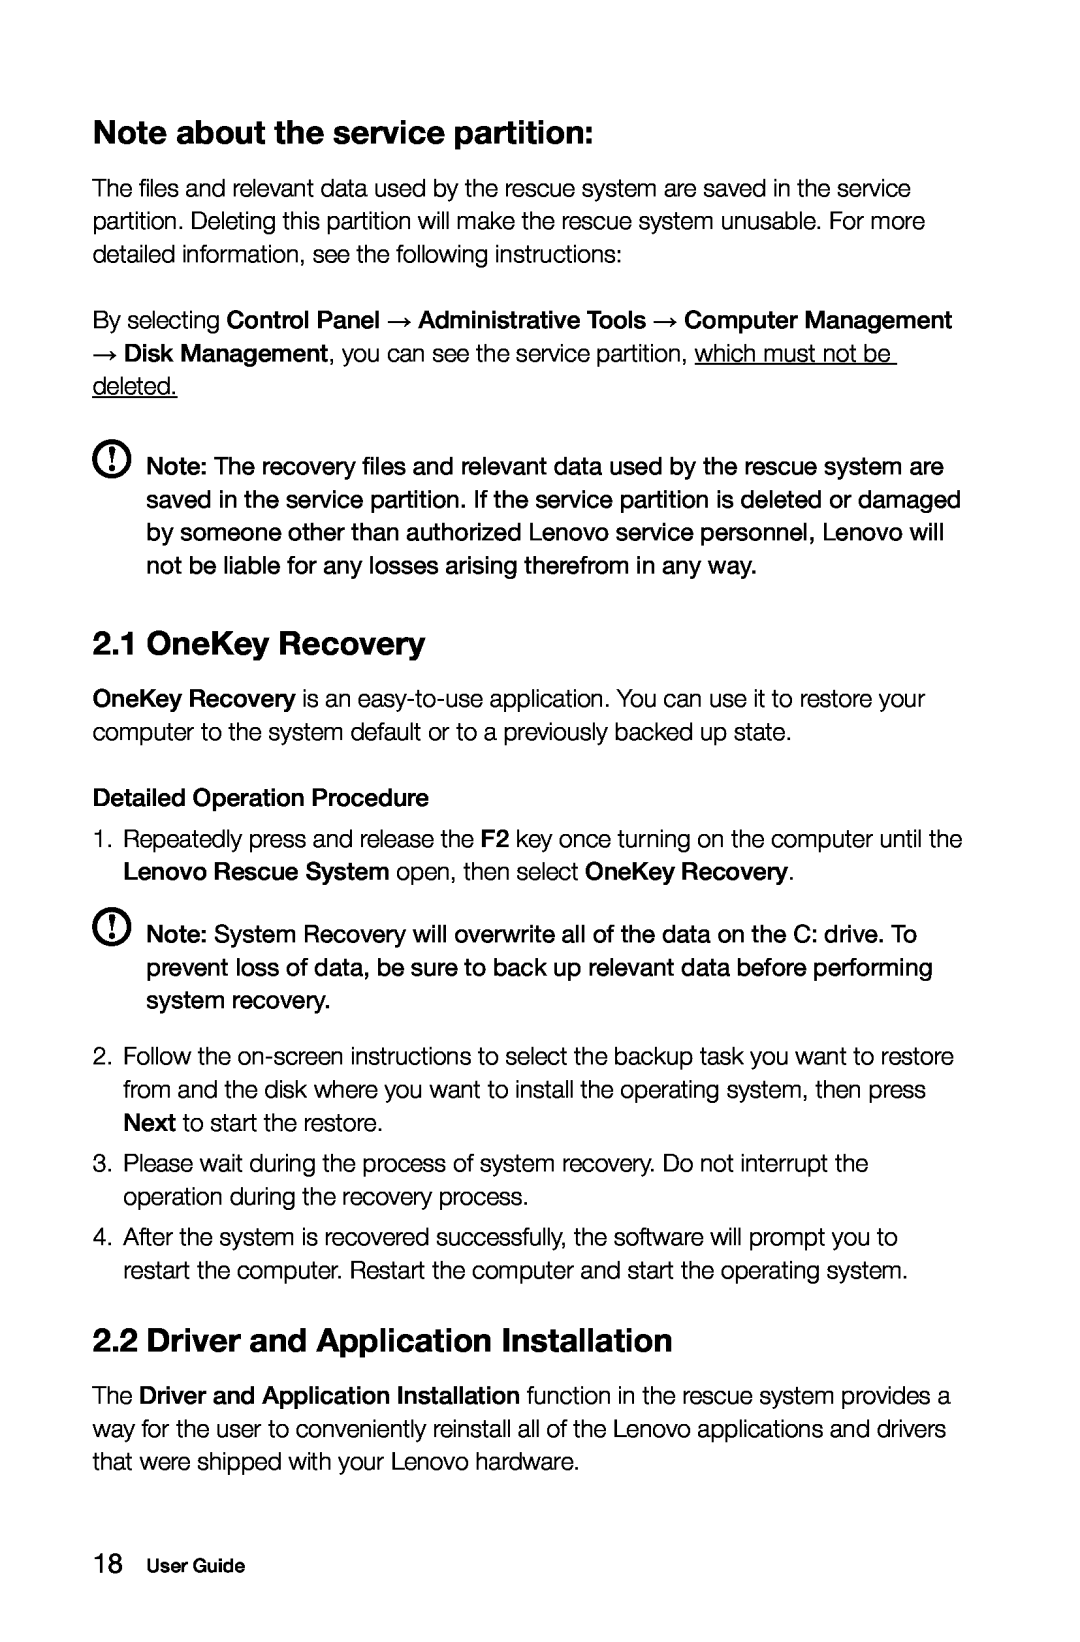 Lenovo 10062/7727, 10073/1169 manual Note about the service partition, OneKey Recovery, Driver and Application Installation 